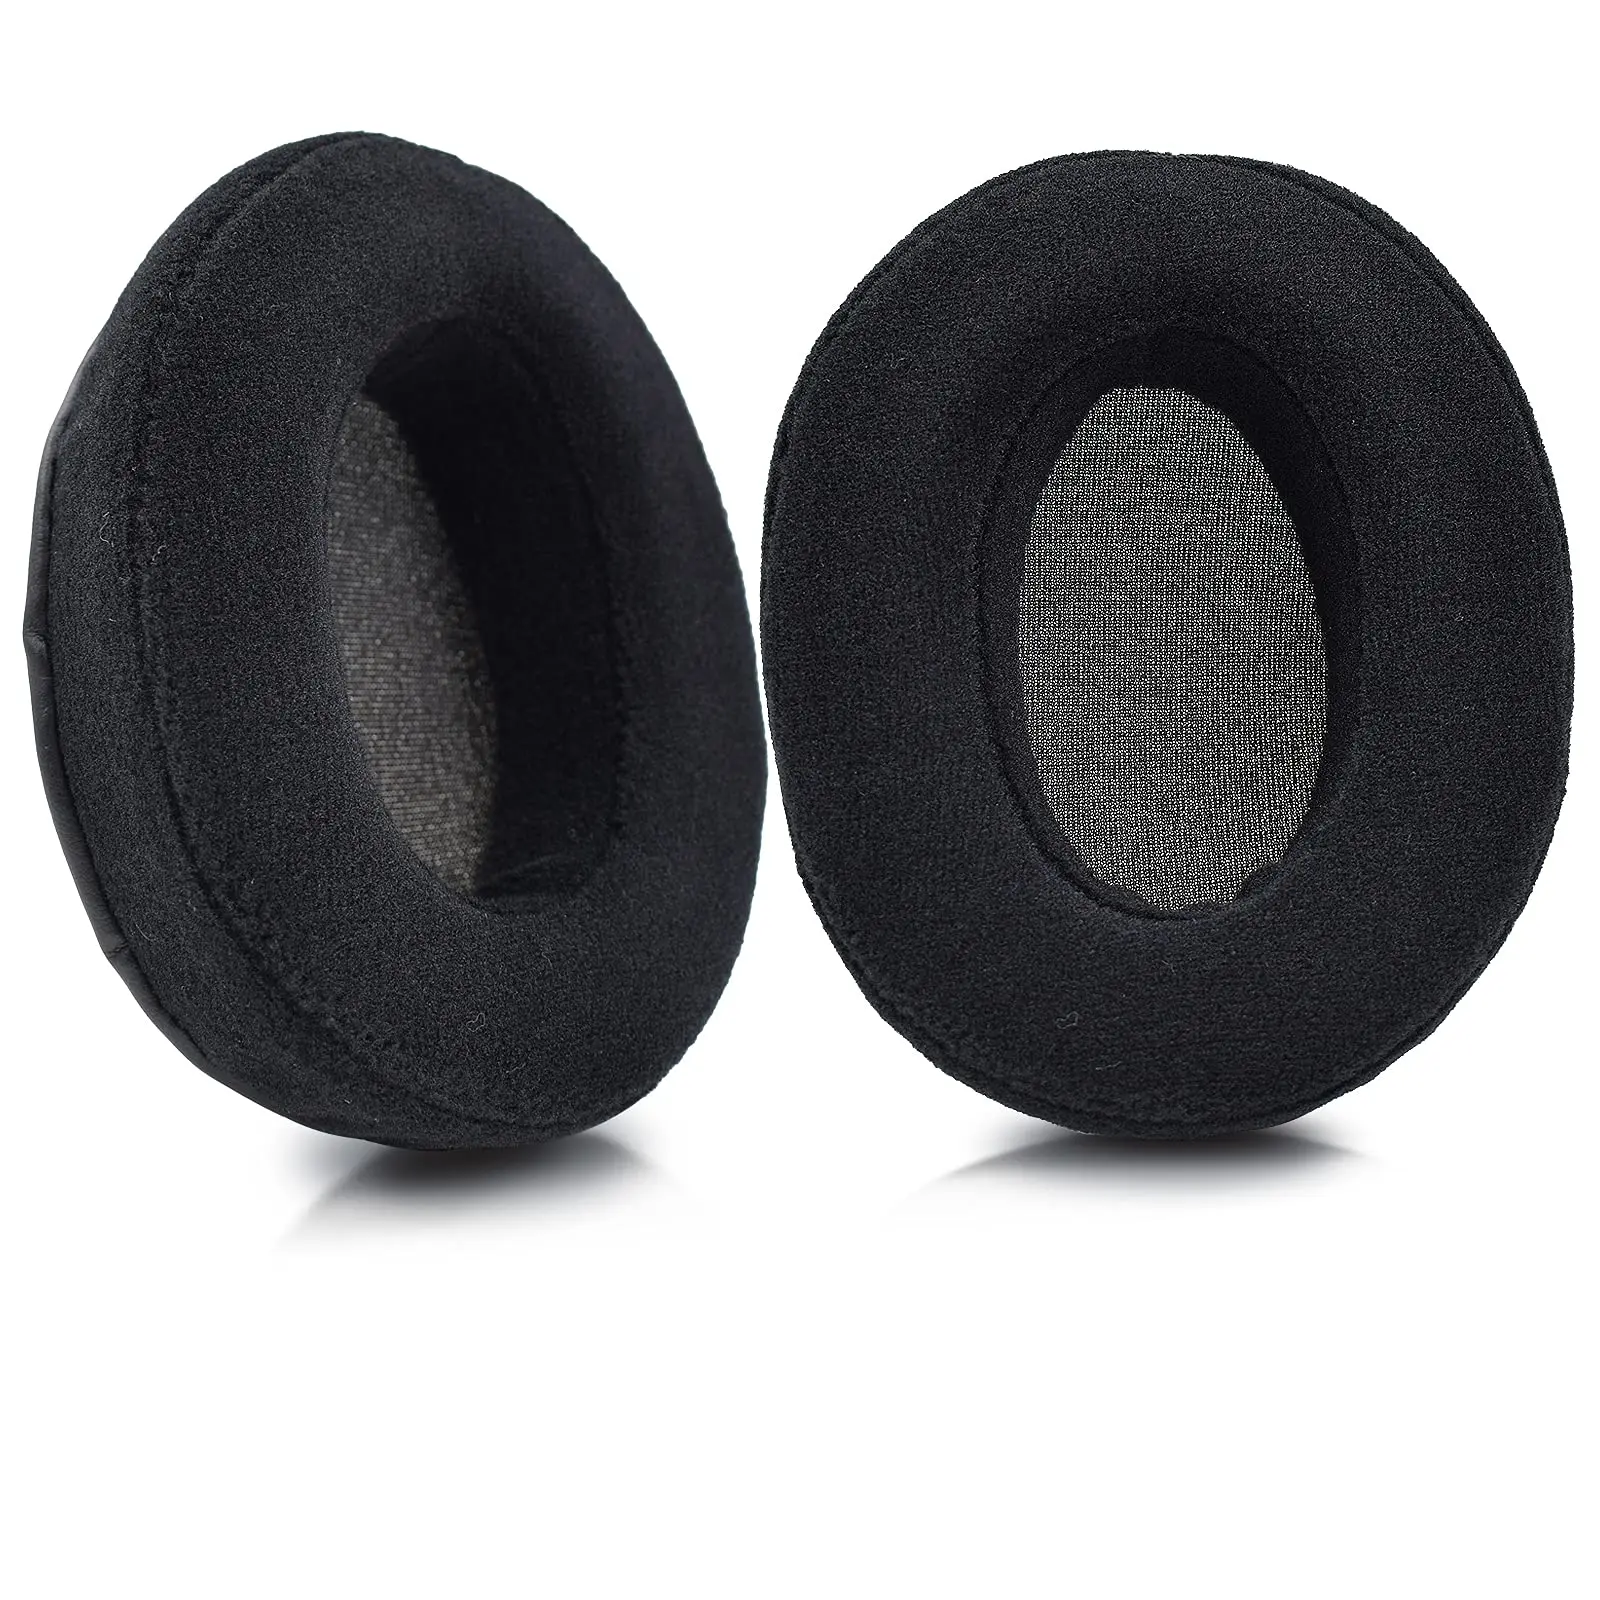 

M50X Ear Pads, Replacement Earpads for Audio-Technica ATH-M50X, ATH-M40X, ATH-M30X, ATH-M20X, ATH-M10, Headphones (Velour Black)